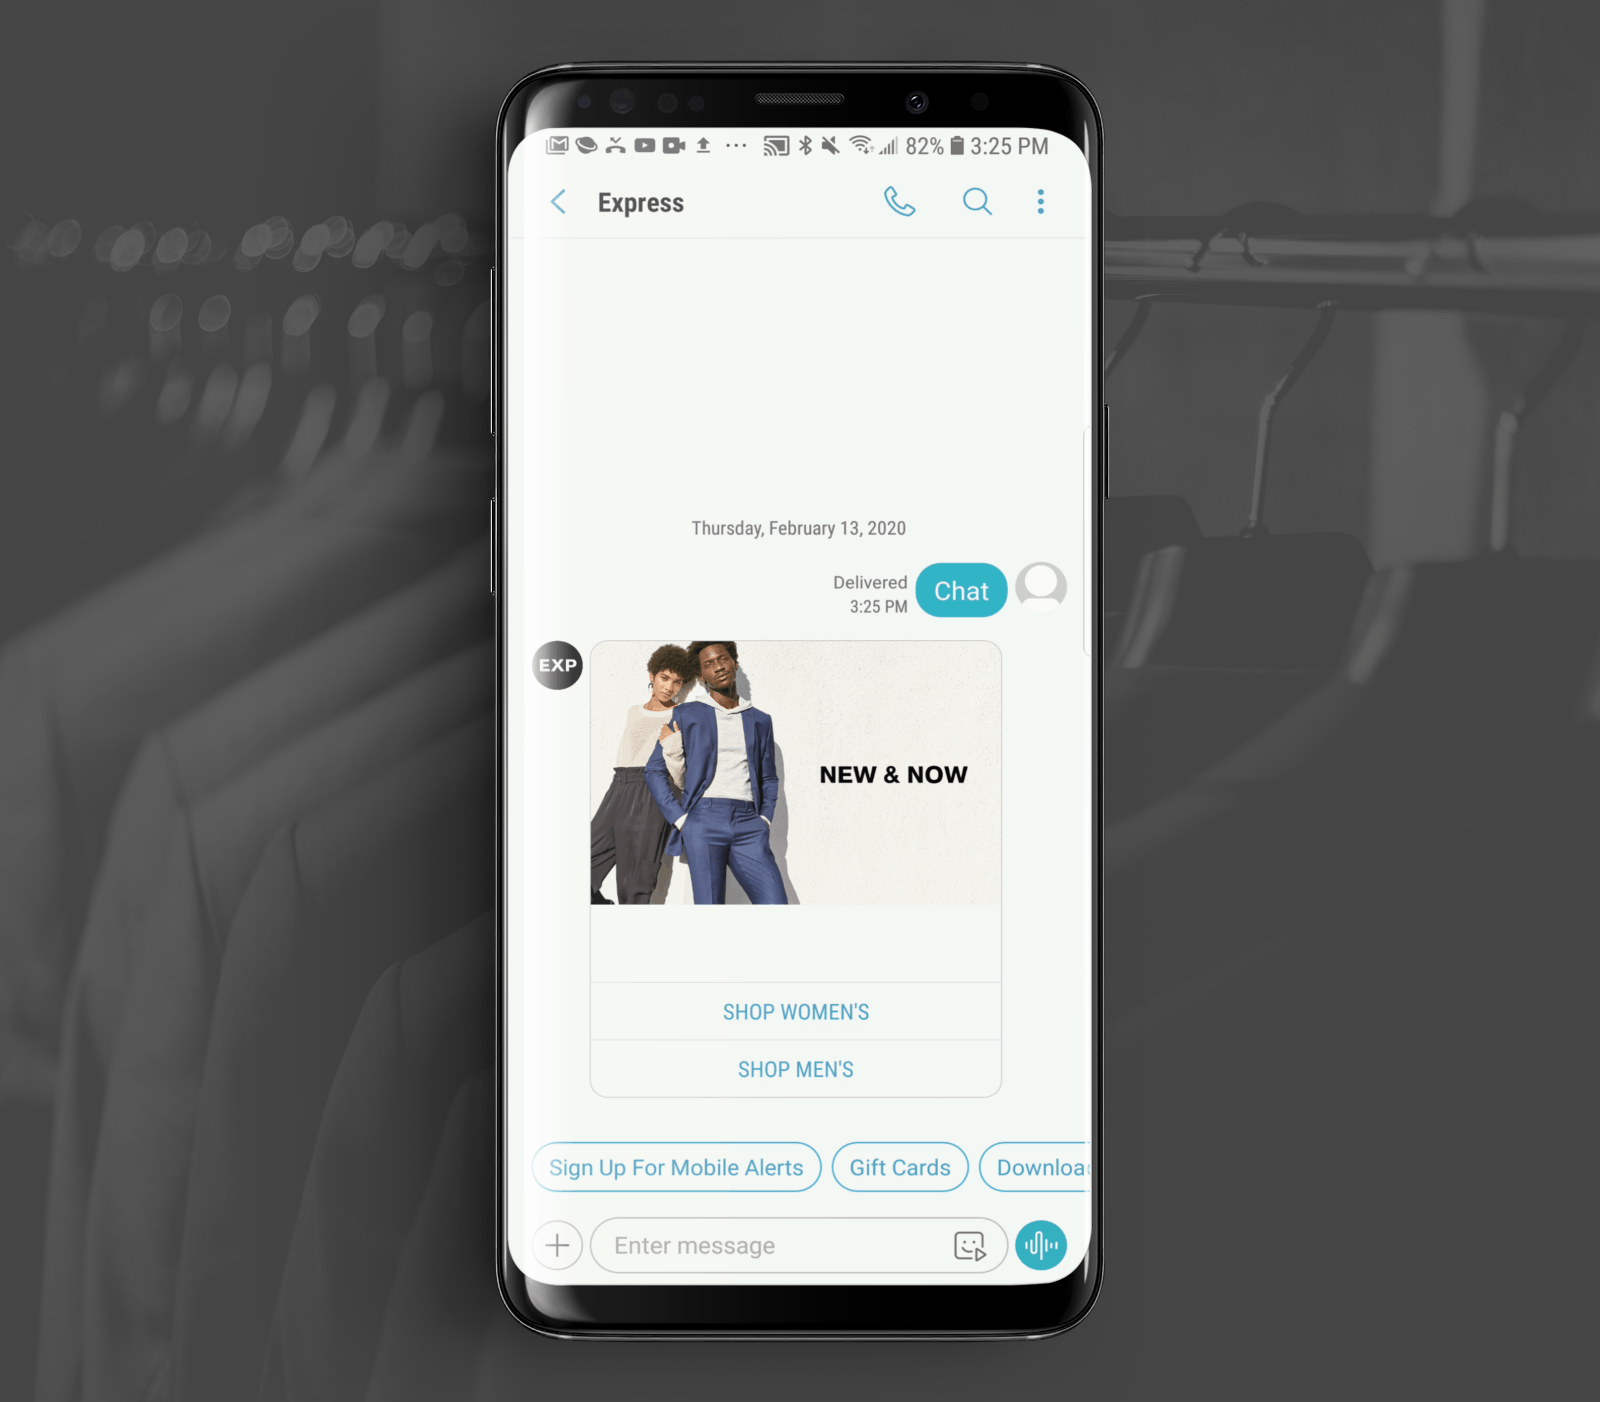 RCS Business Messaging Example from Express Clothing Stores 2